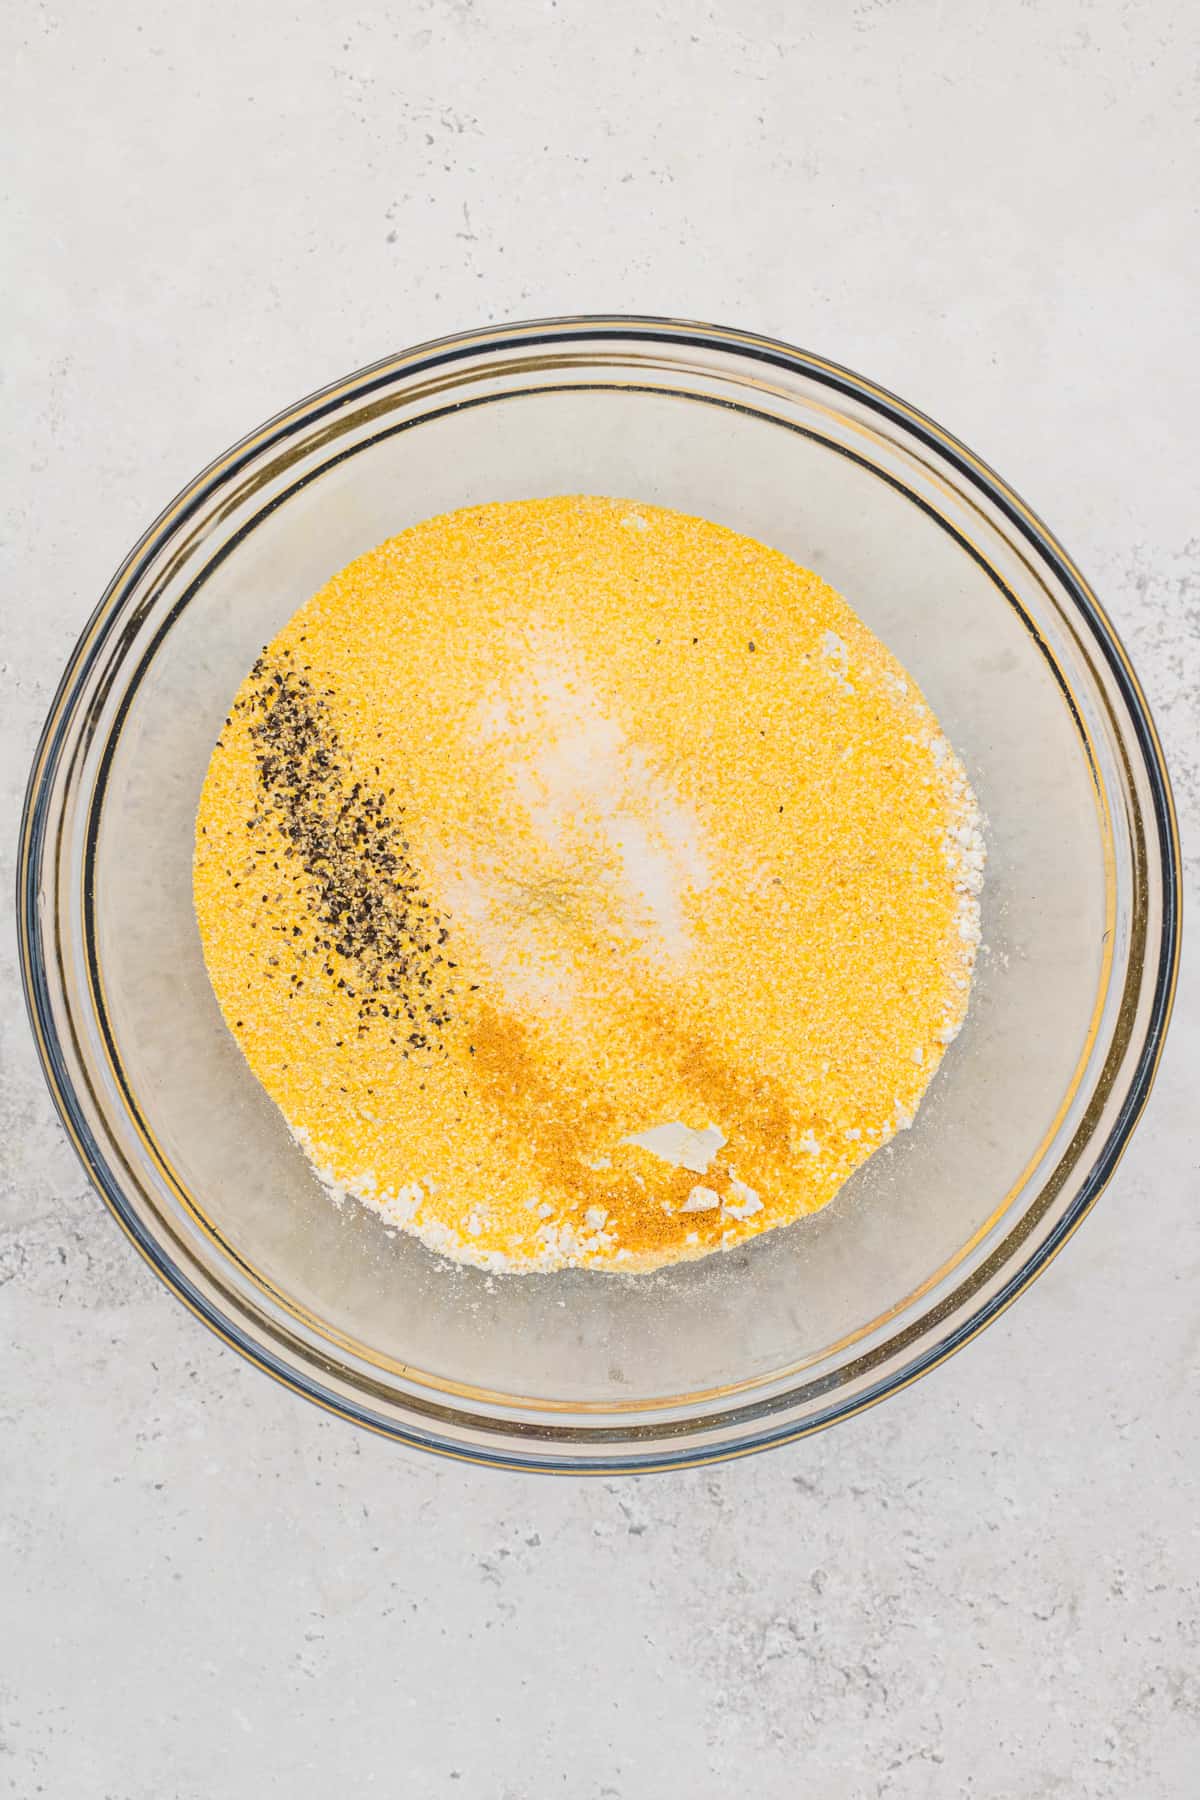 Dry ingredients - cornmeal, Bisquick, salt, pepper, garlic powder - measured into a mixing bowl for Savory Breakfast Muffins.